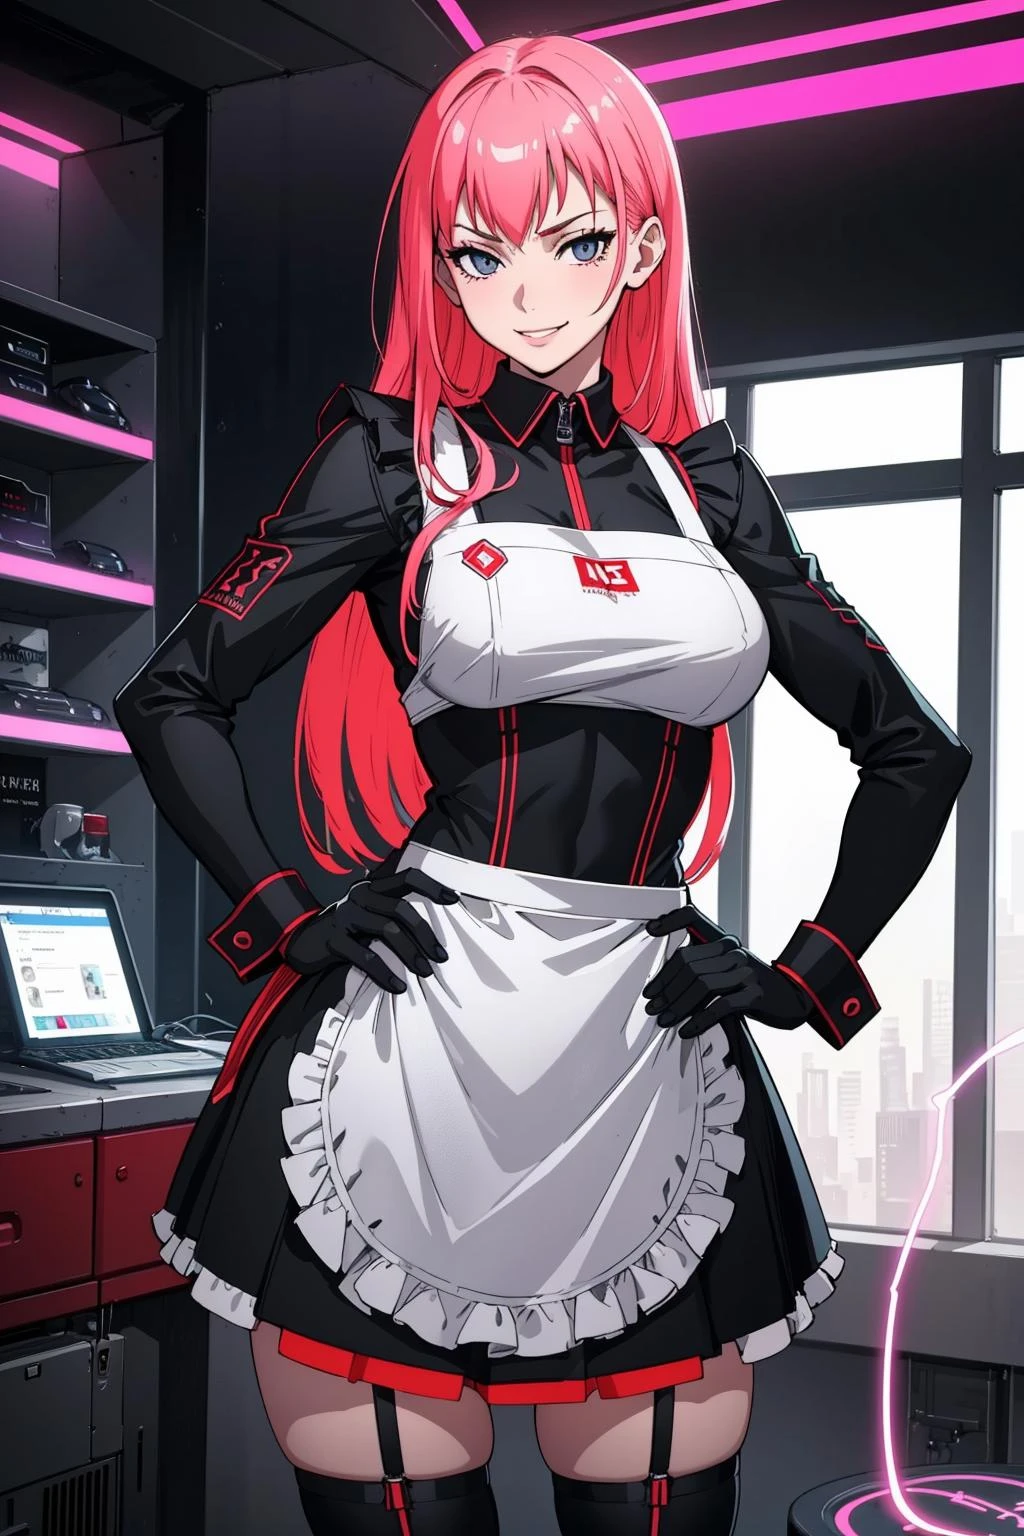 ((Masterpiece, best quality,edgQuality)),smirk,smug,((neons, electric circuits,))
edgApron,edgFut_clothing, a woman in a futuristic suit and apron standing in a room ,wearing edgFut_clothing,wearing edgApron
 